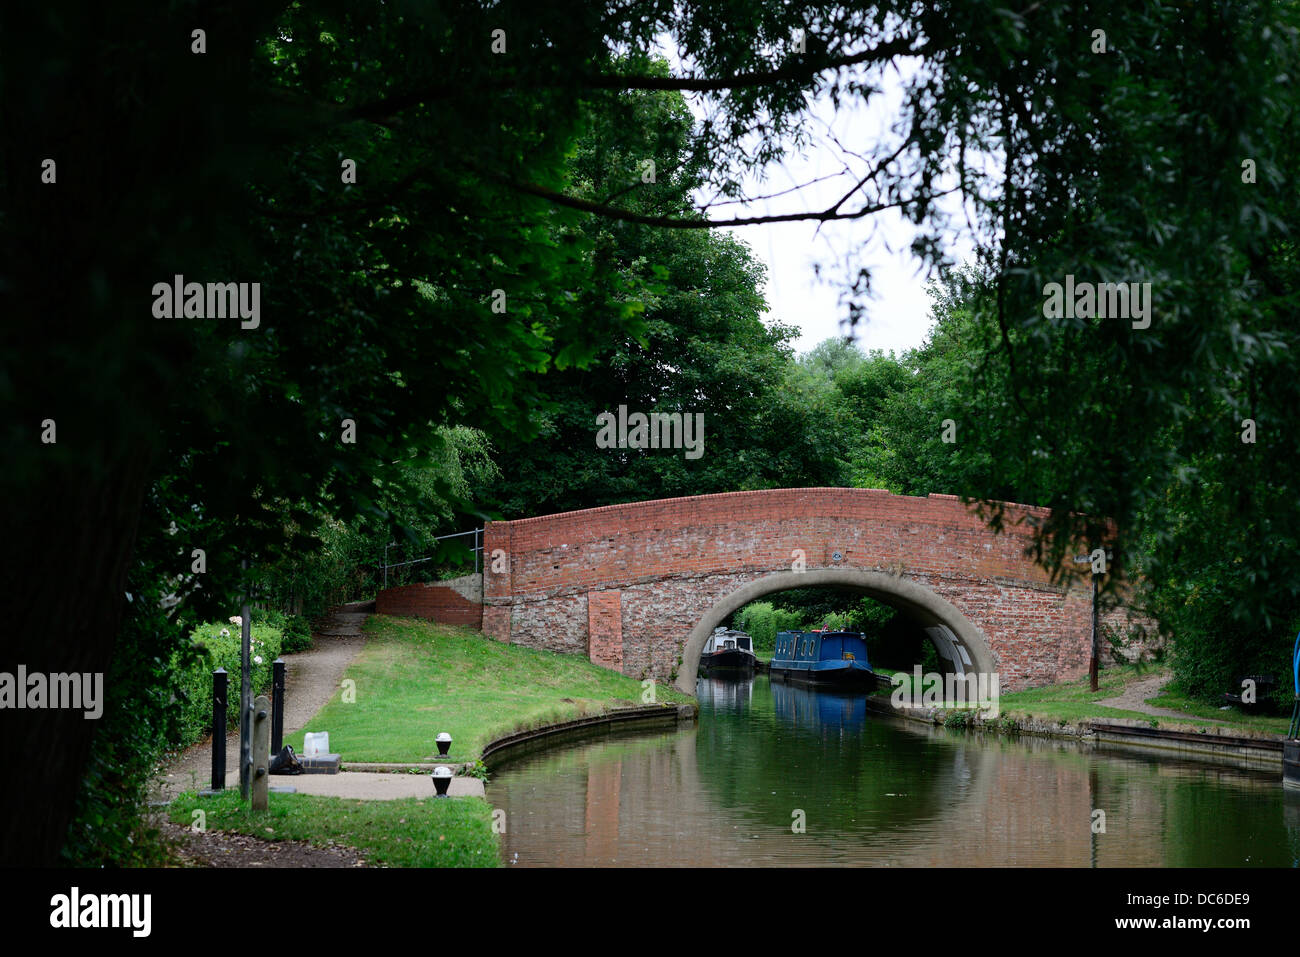 A bridge over a canal in the UK Stock Photo